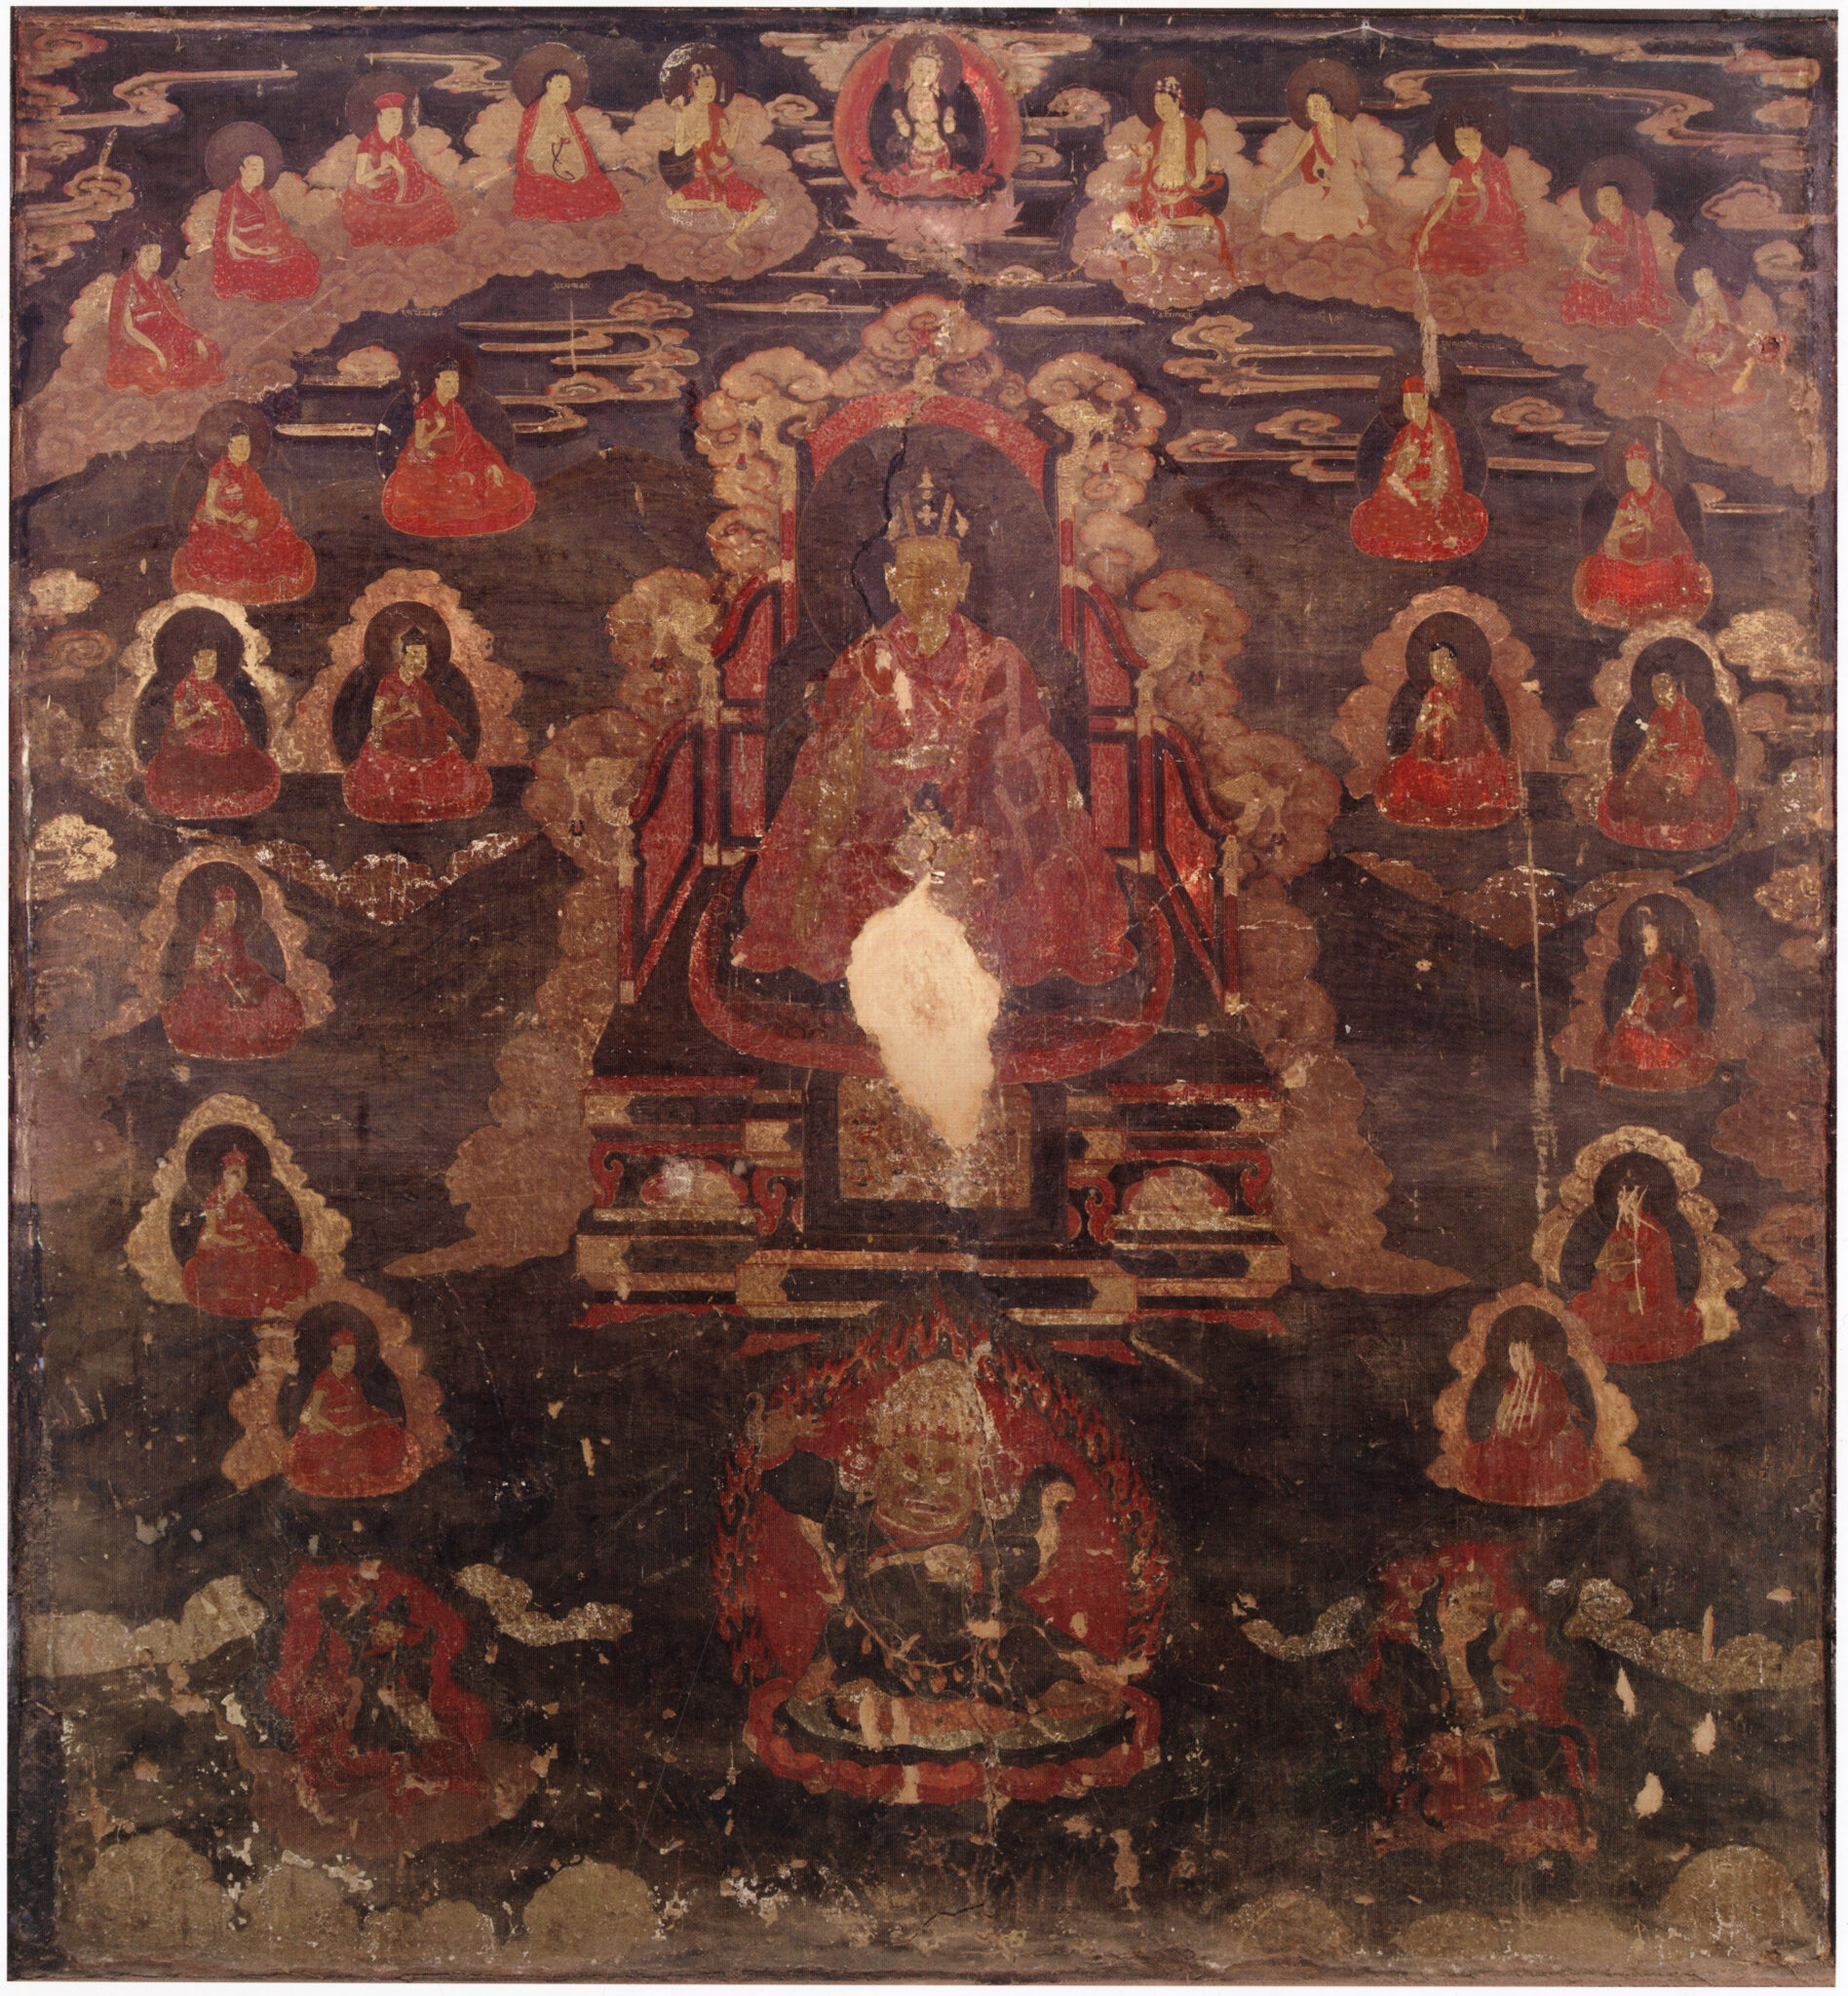 Mural in red oranges depicting figures suspended amongst clouds gathered around central seated figure